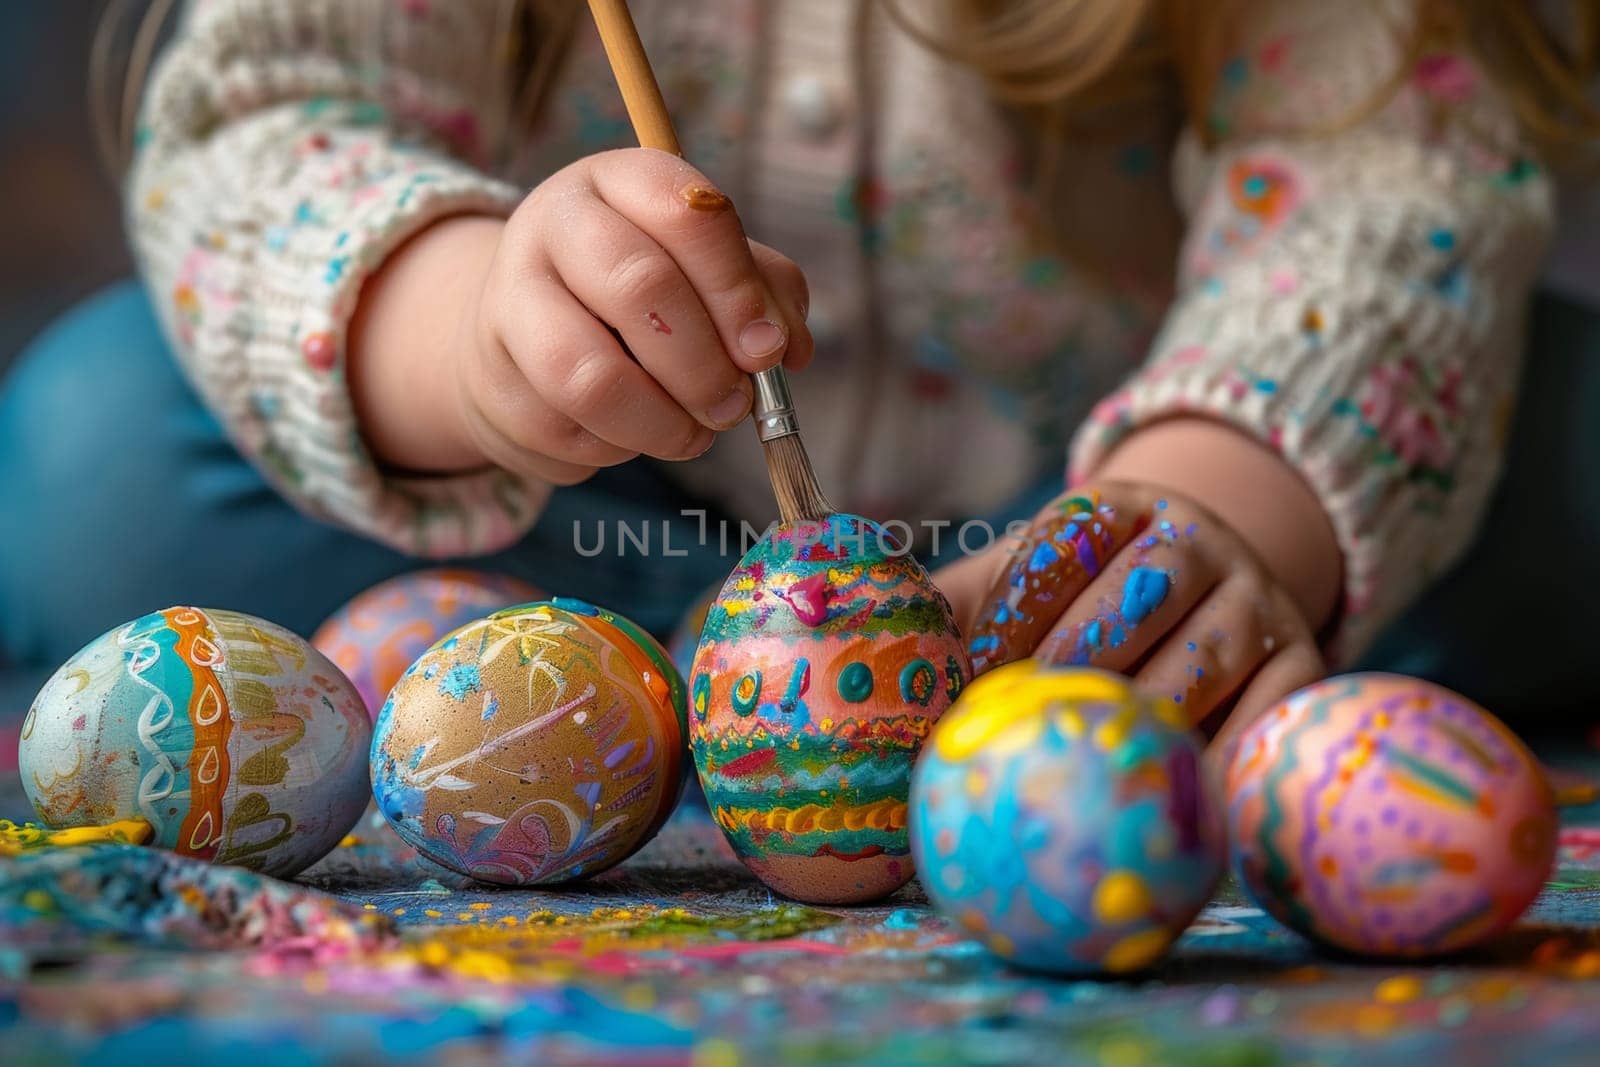 A child is painting Easter eggs with a brush. The eggs are colorful and have different designs. Concept of fun and creativity